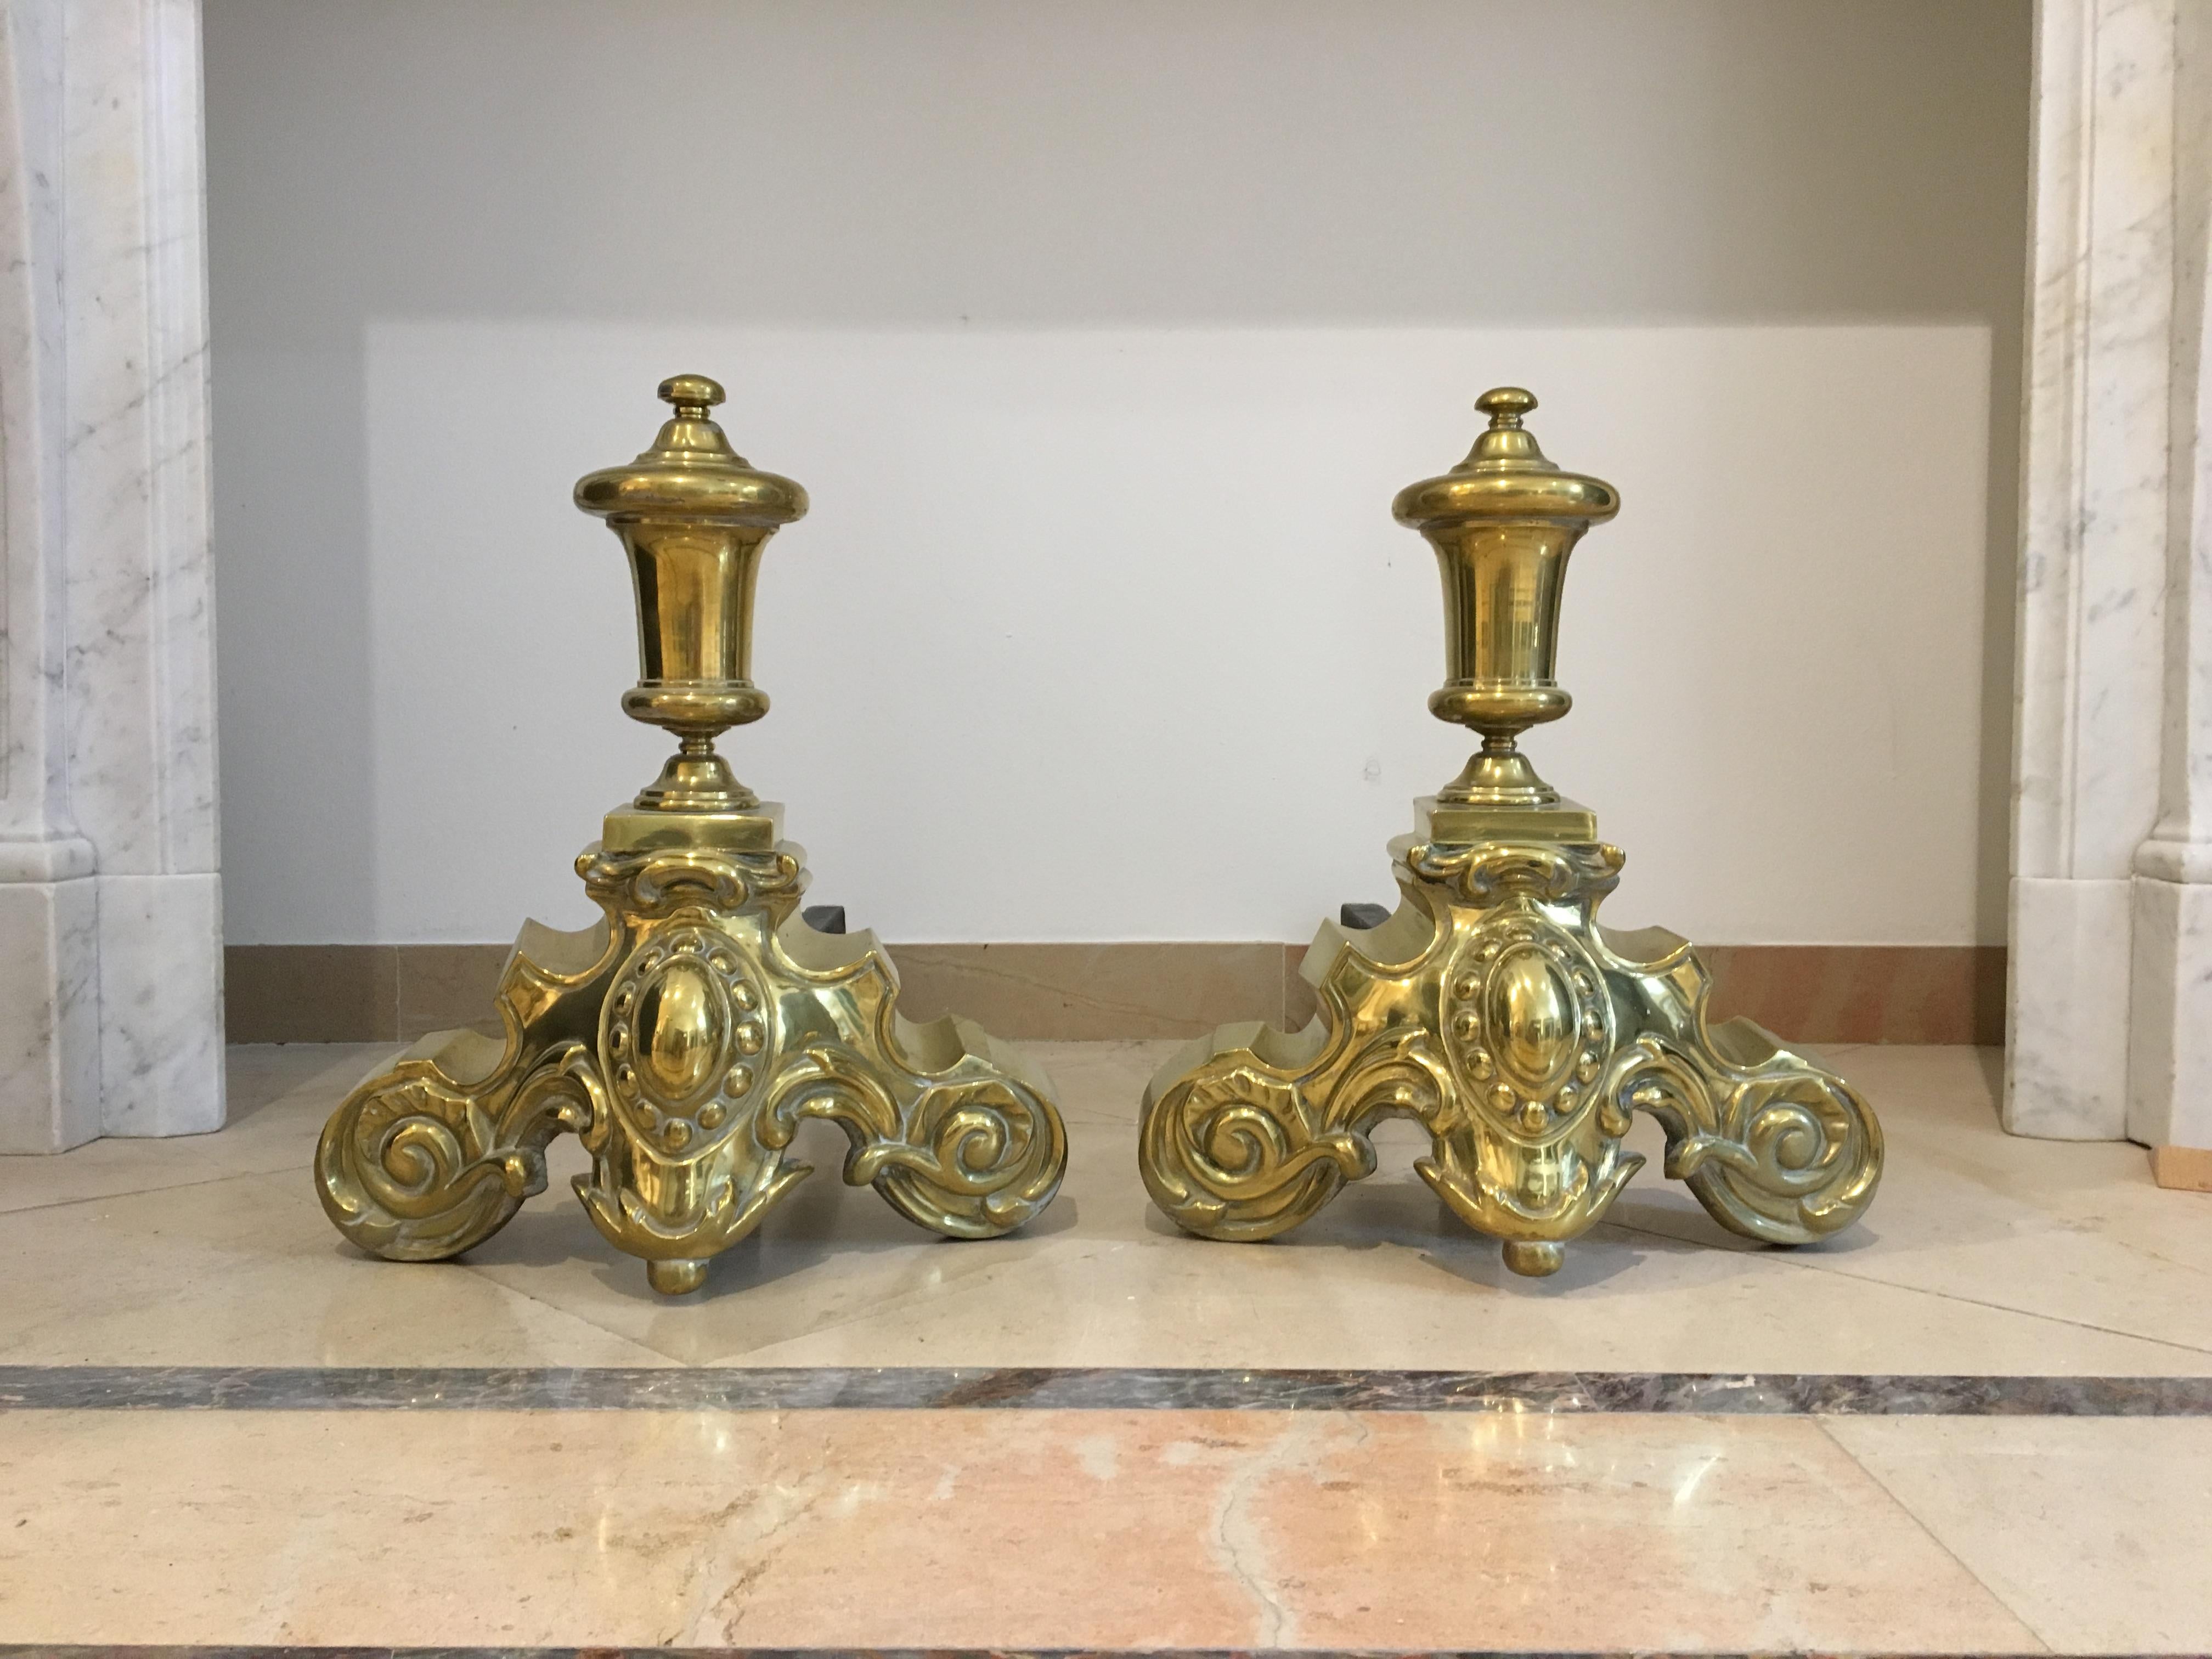 Superb set of 19th century brass andirons.
This impressive French set has deep wrought iron legs and perfect casted and very decorative brass fronts. 

Great original and usable condition, works great in a real log fire.

Sold by Schermerhorn